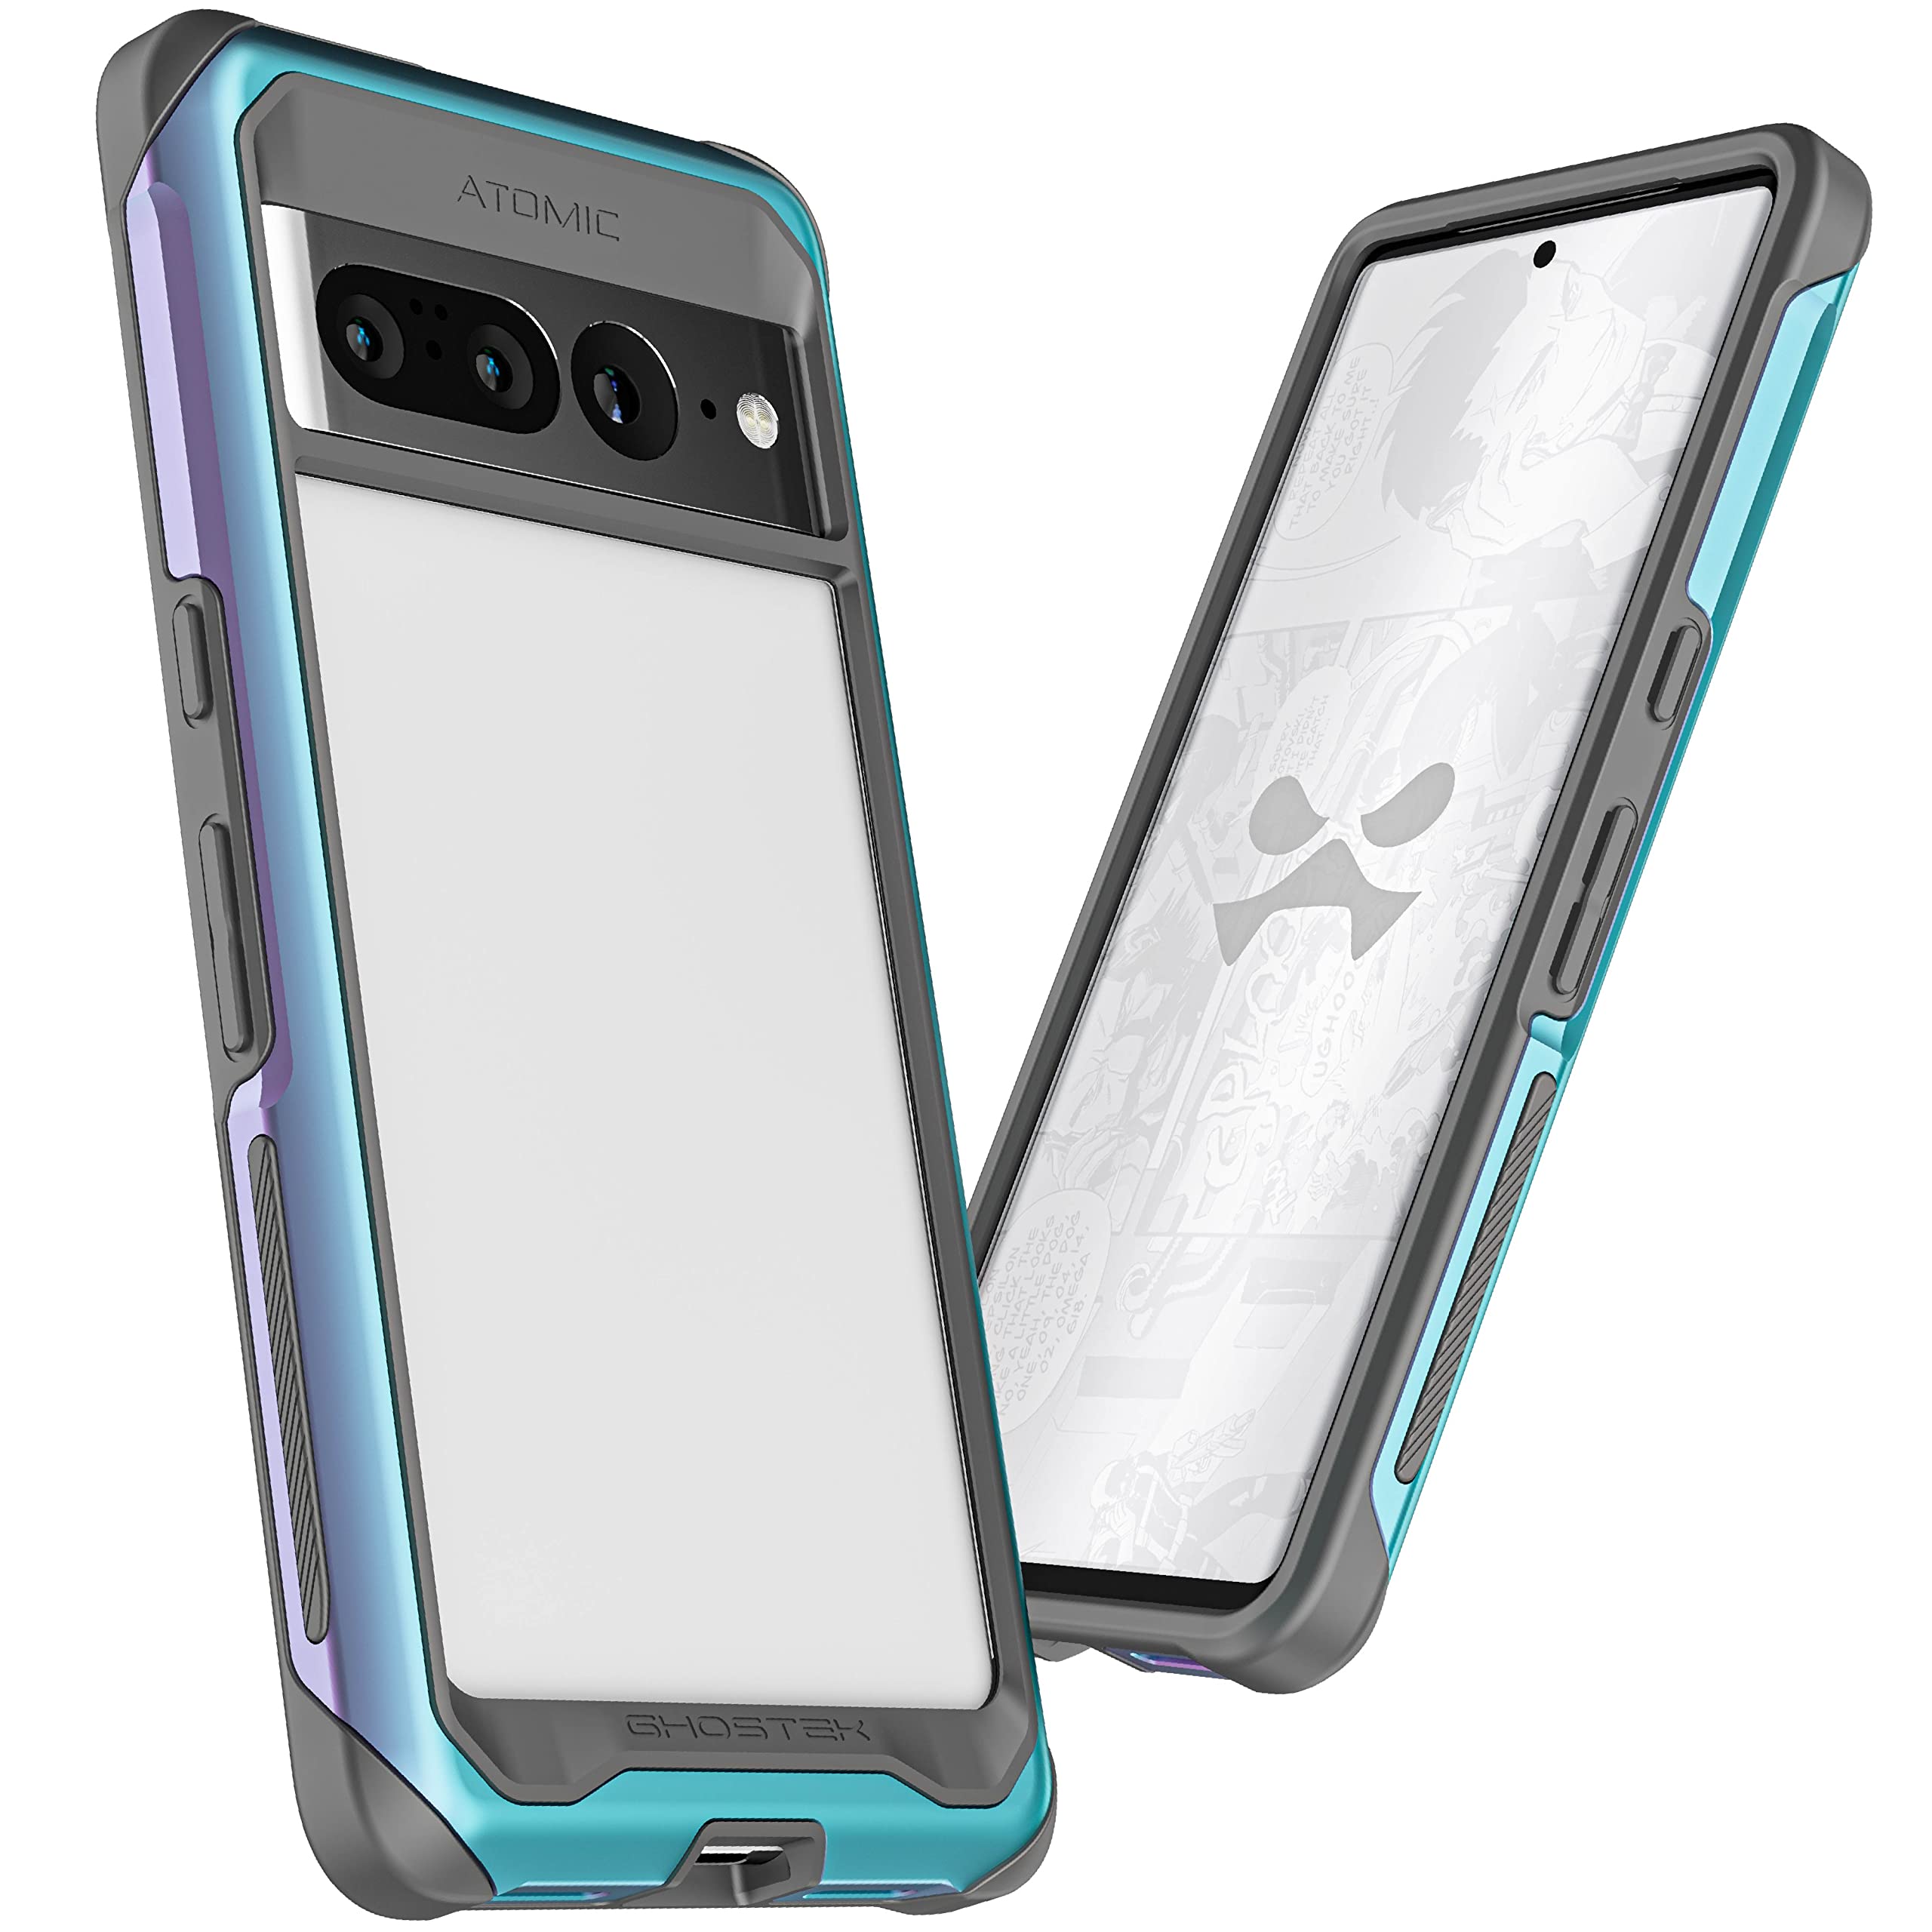 Ghostek ATOMIC slim Google Pixel 7 Case Clear with Aluminum Bumper Premium Rugged Heavy Duty Shockproof Protection Tough Protective Phone Covers Designed for 2022 Google Pixel 7 (6.3 Inch) (Prismatic)